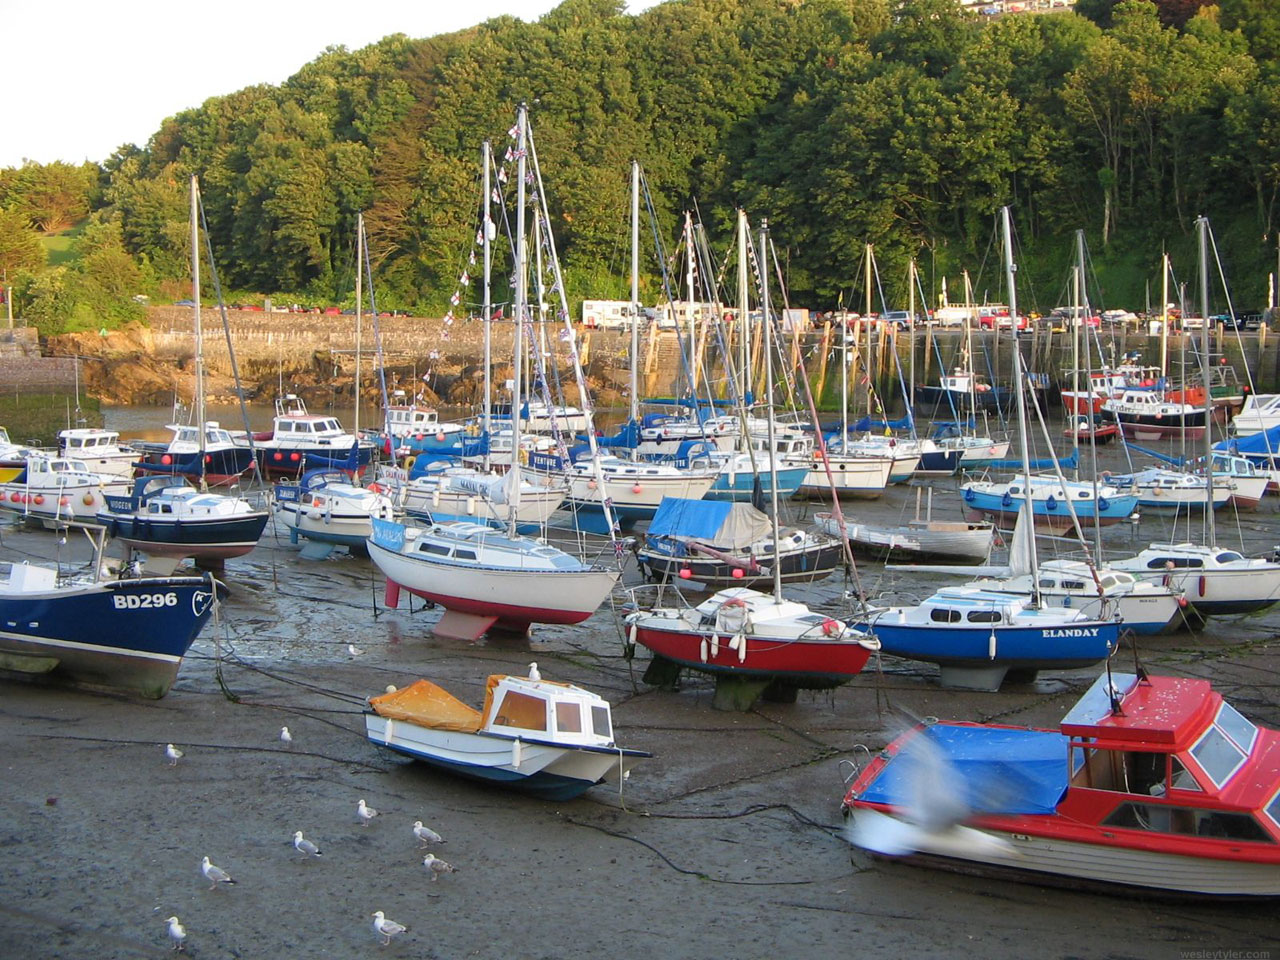 Boats in a Harbor in the UK